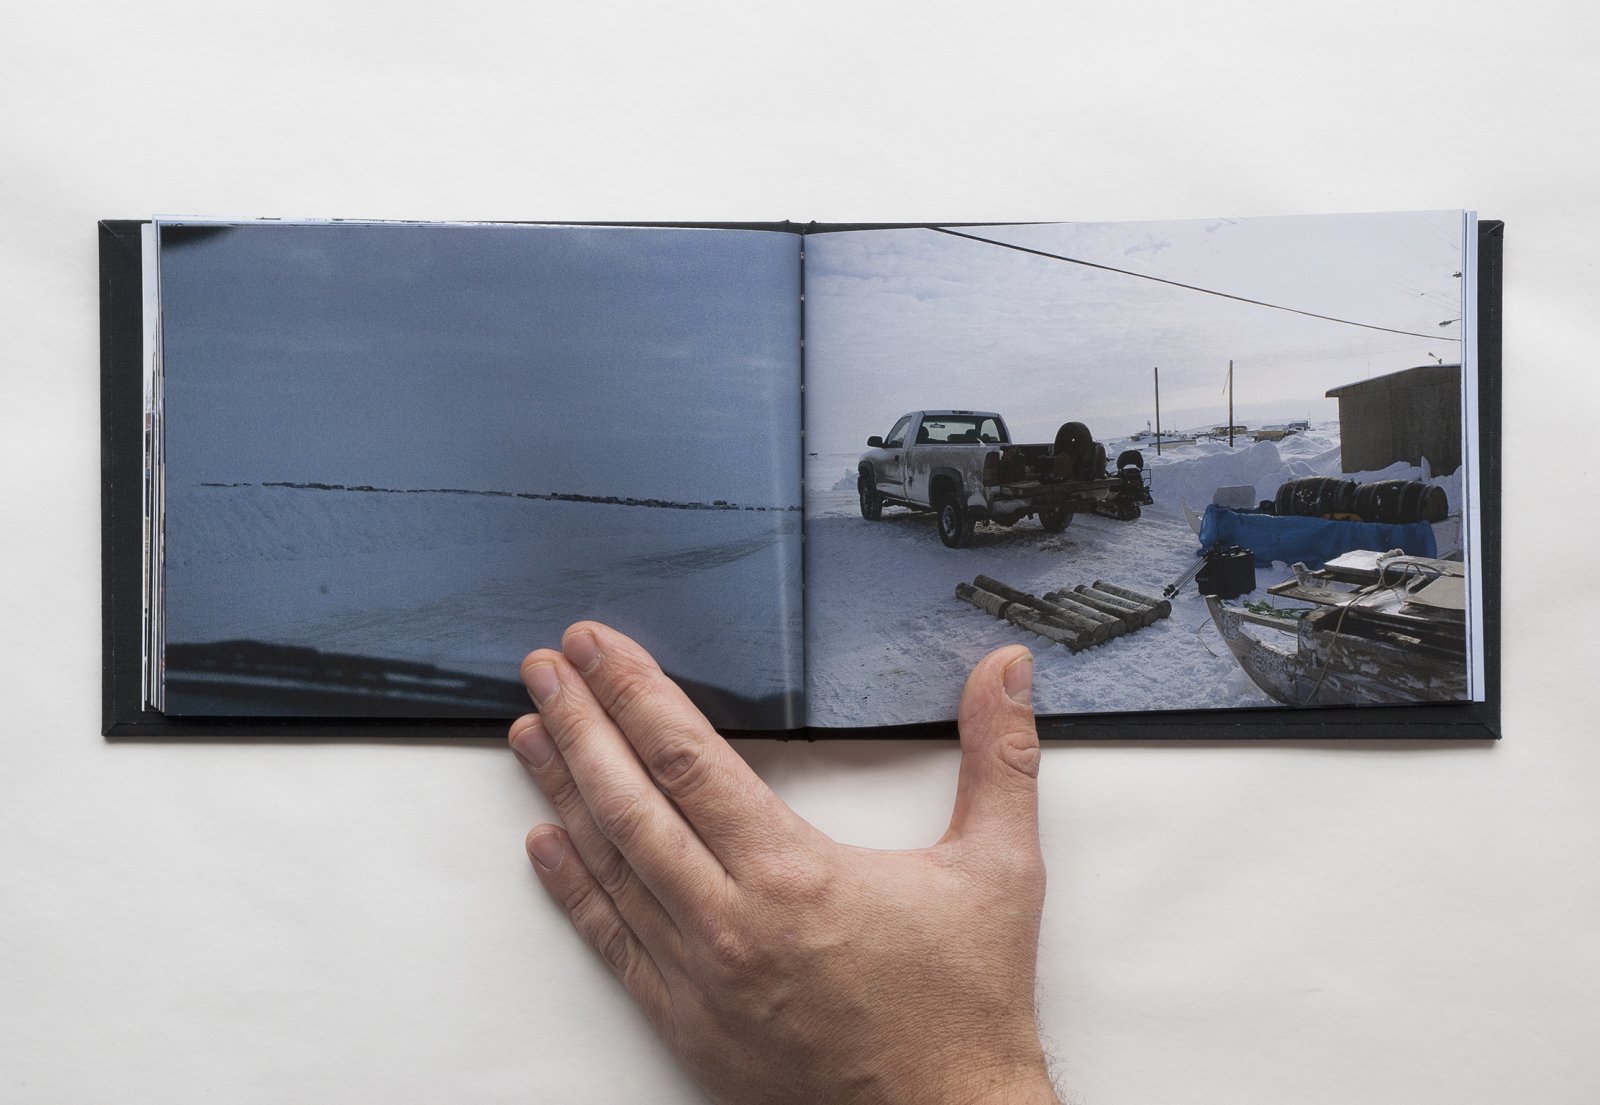 Kevin Schmidt, A Sign in the Northwest Passage (Photobook), 2010, print-on-demand photobook, 60 pages, 6 x 8 in. (15 x 20 cm)